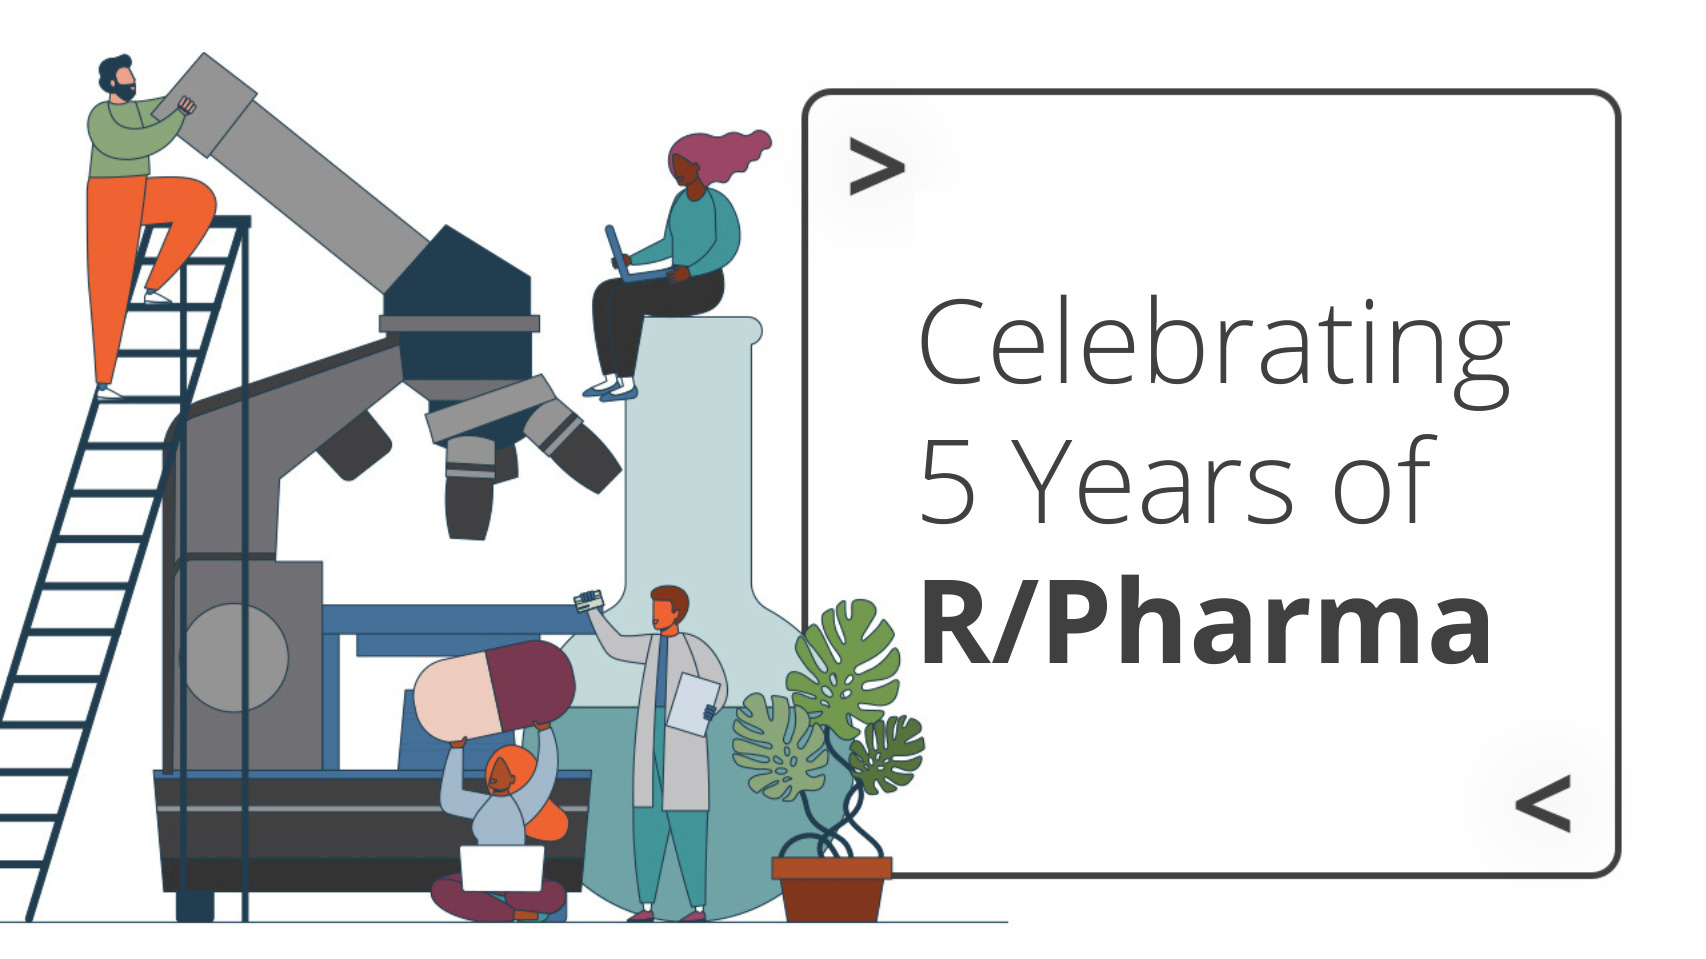 Text: Celebrating 5 years of R/Pharma. A cartoon of minature people looking through a microscope and holding various pharma-related things.